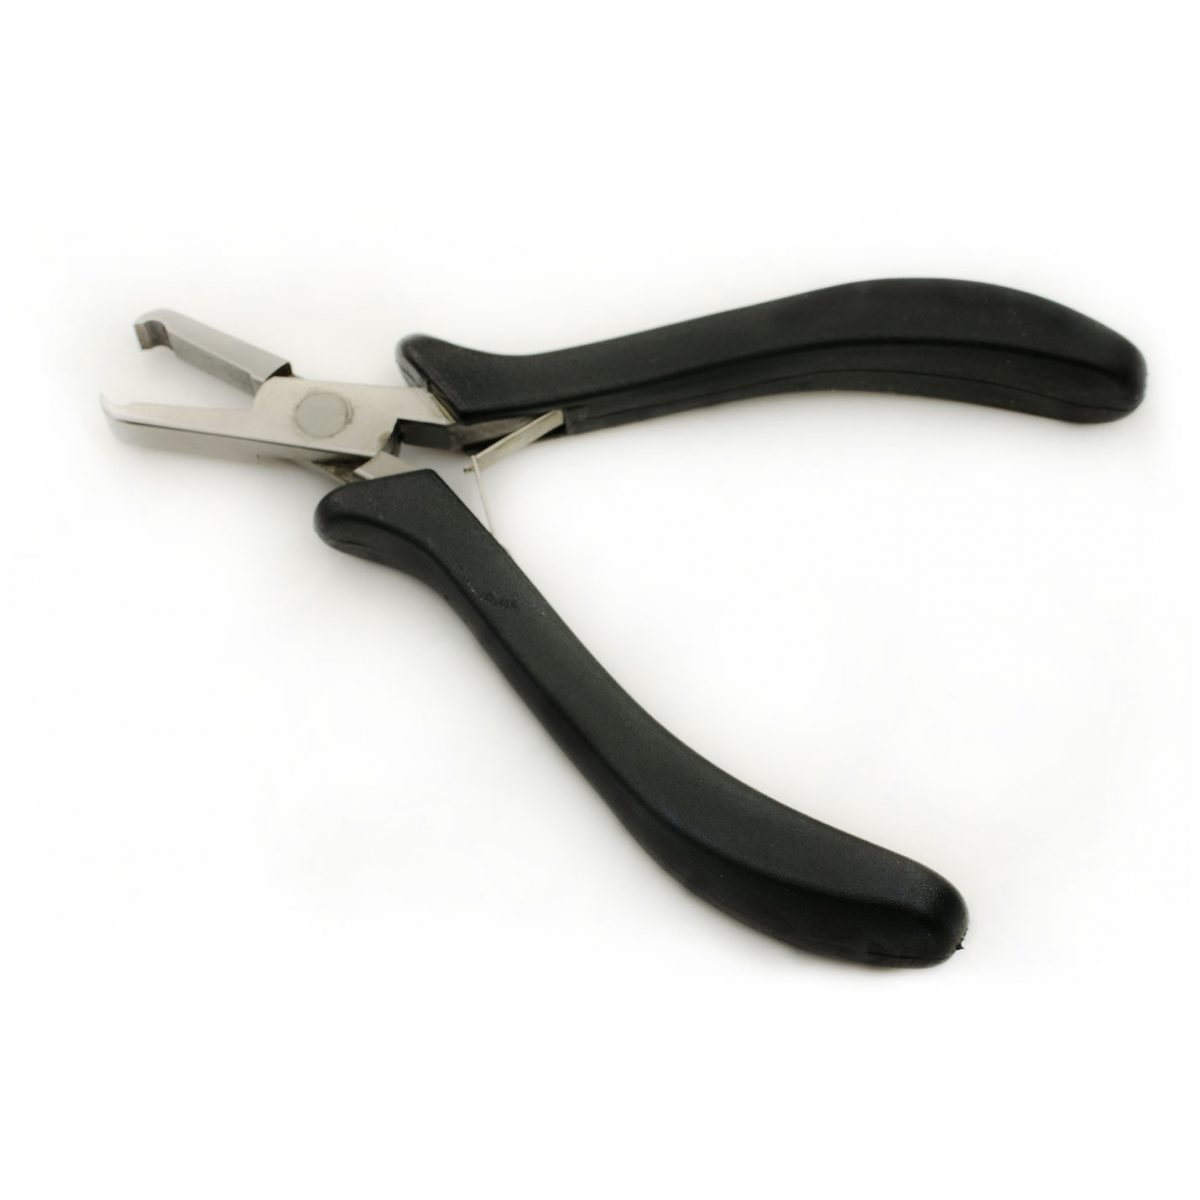 CUTTING PLIERS FOR PLASTIC